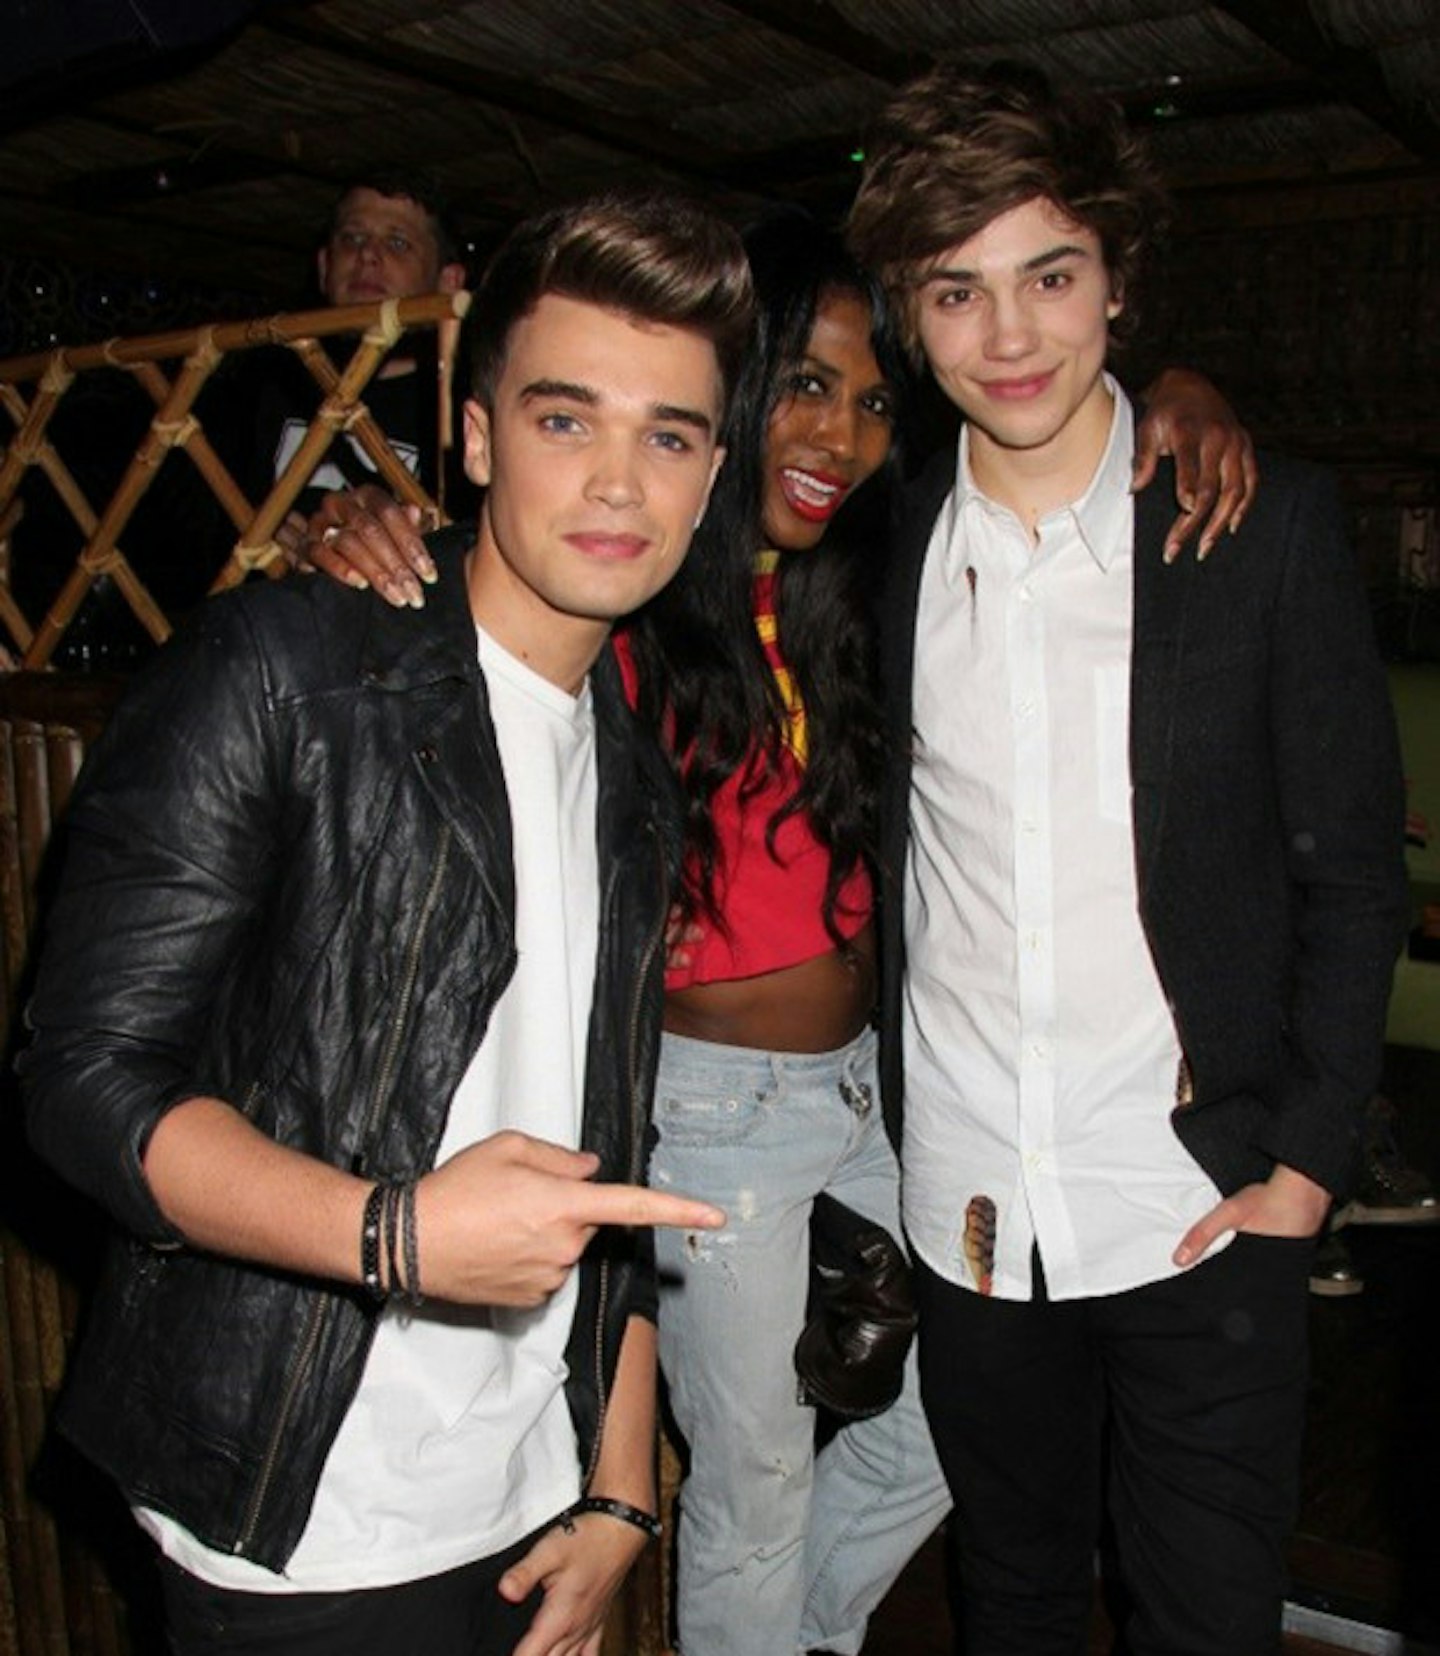 NO Sinitta, you can't be in Union J...